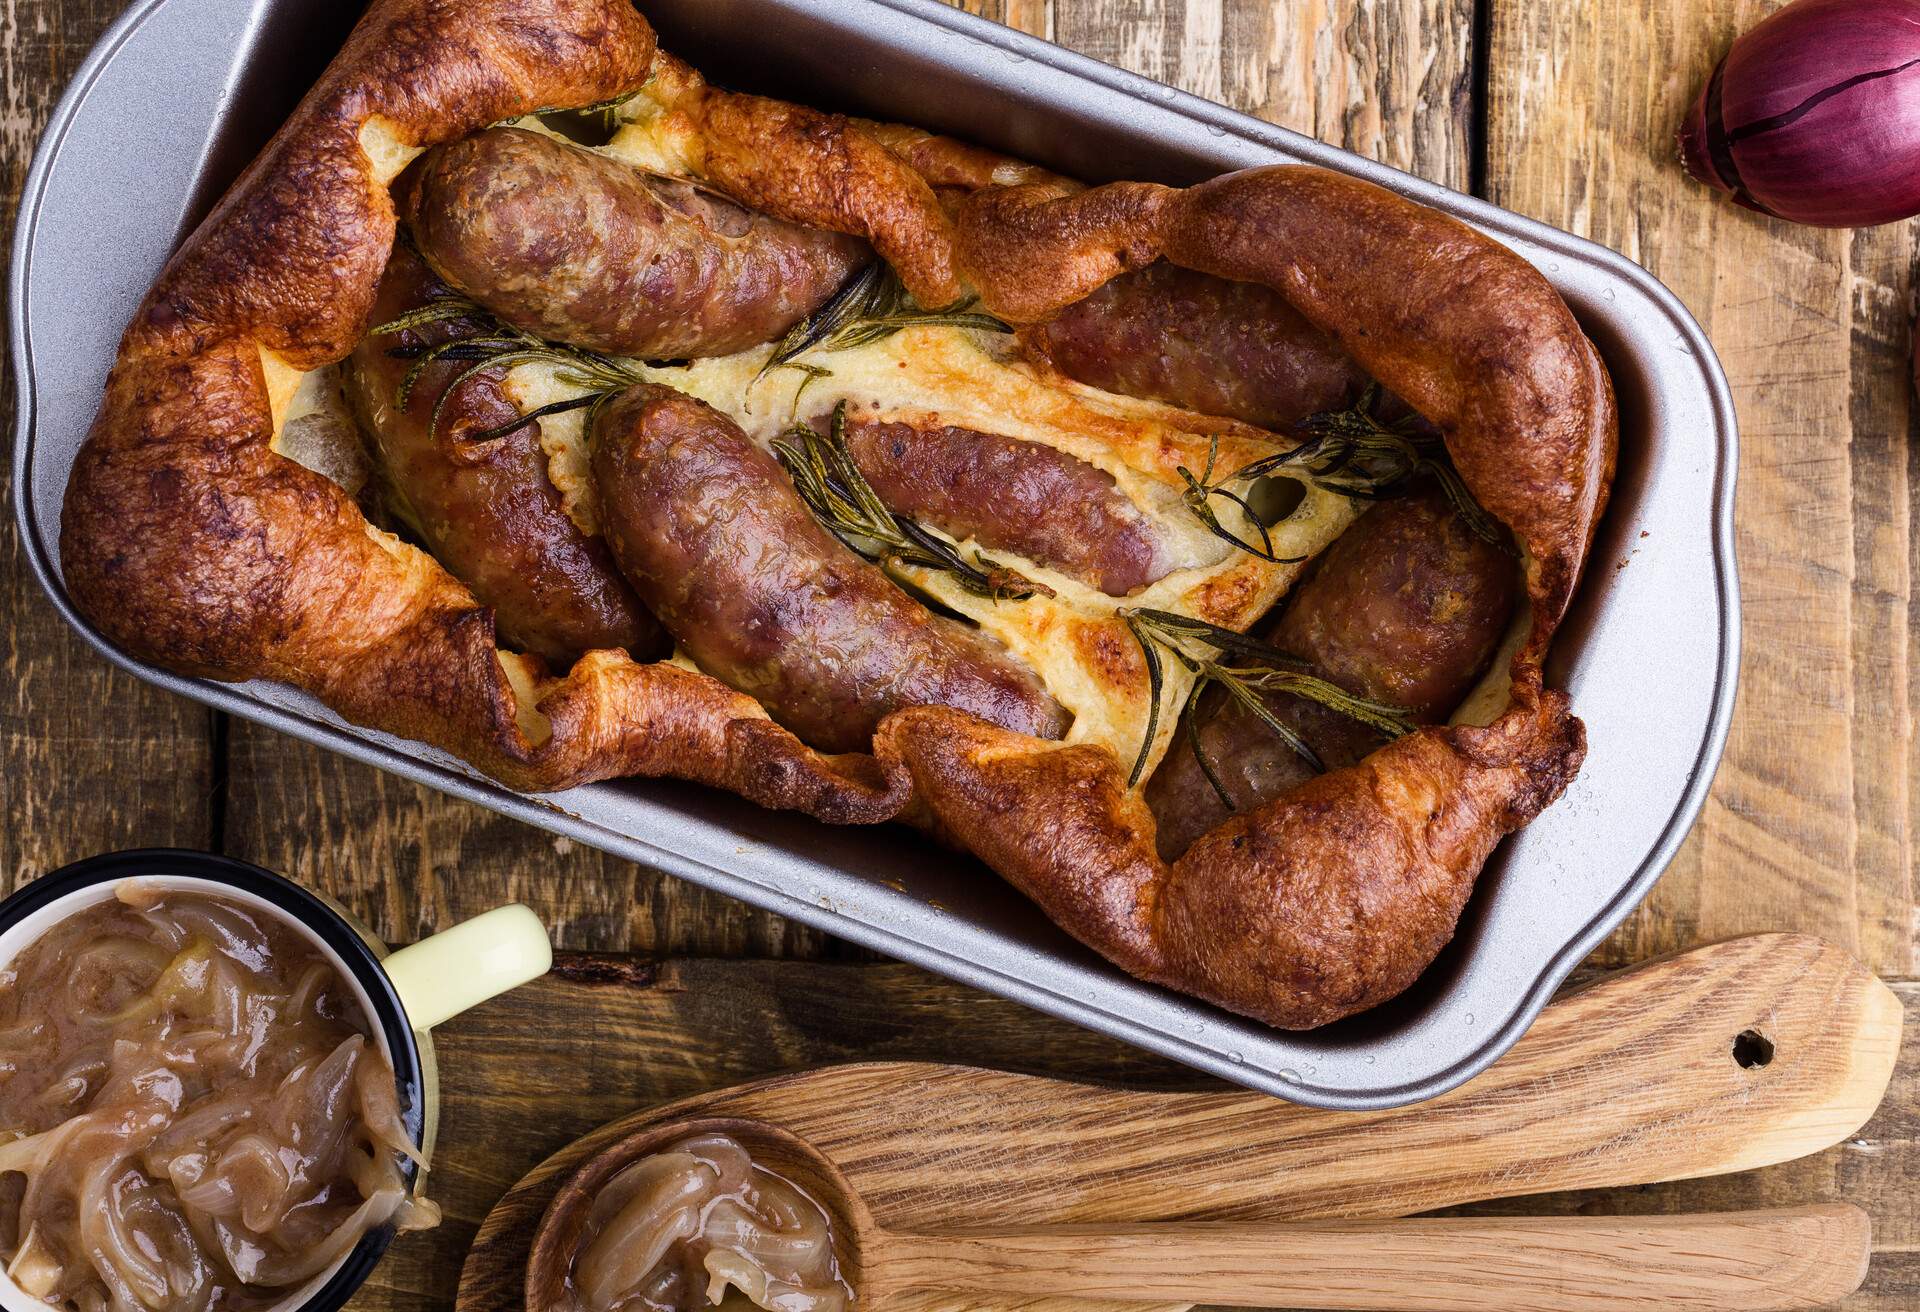 Baked sausages in Yorkshire pudding batter, toad in the hole with  onion gravy on rustic wooden table viewed from above